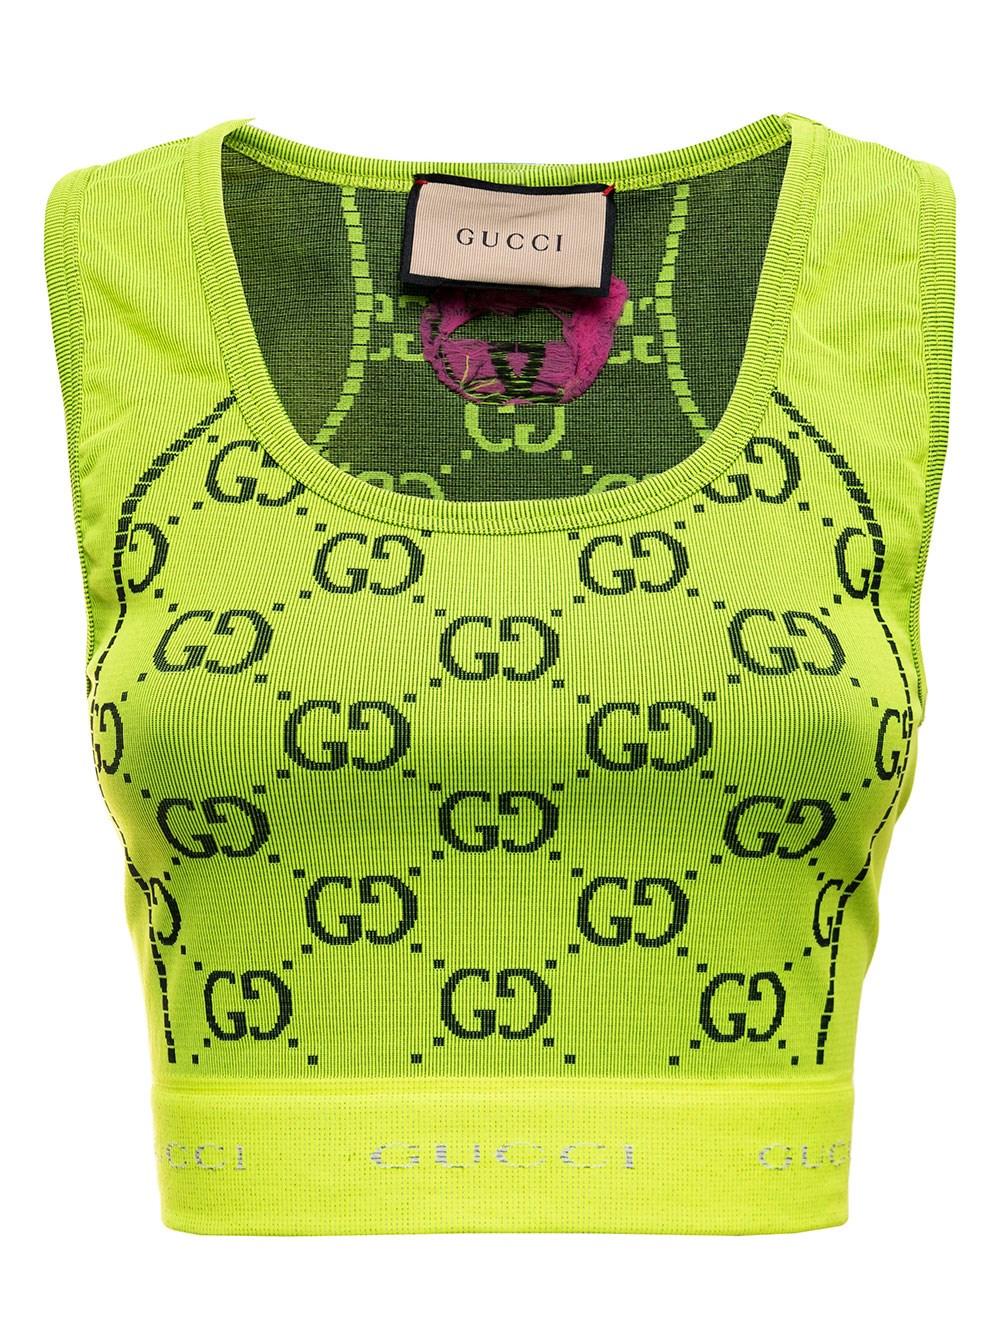 Gucci Woman's Sleeveless Jersey Fluo gg Jacquard Top in Yellow | Lyst